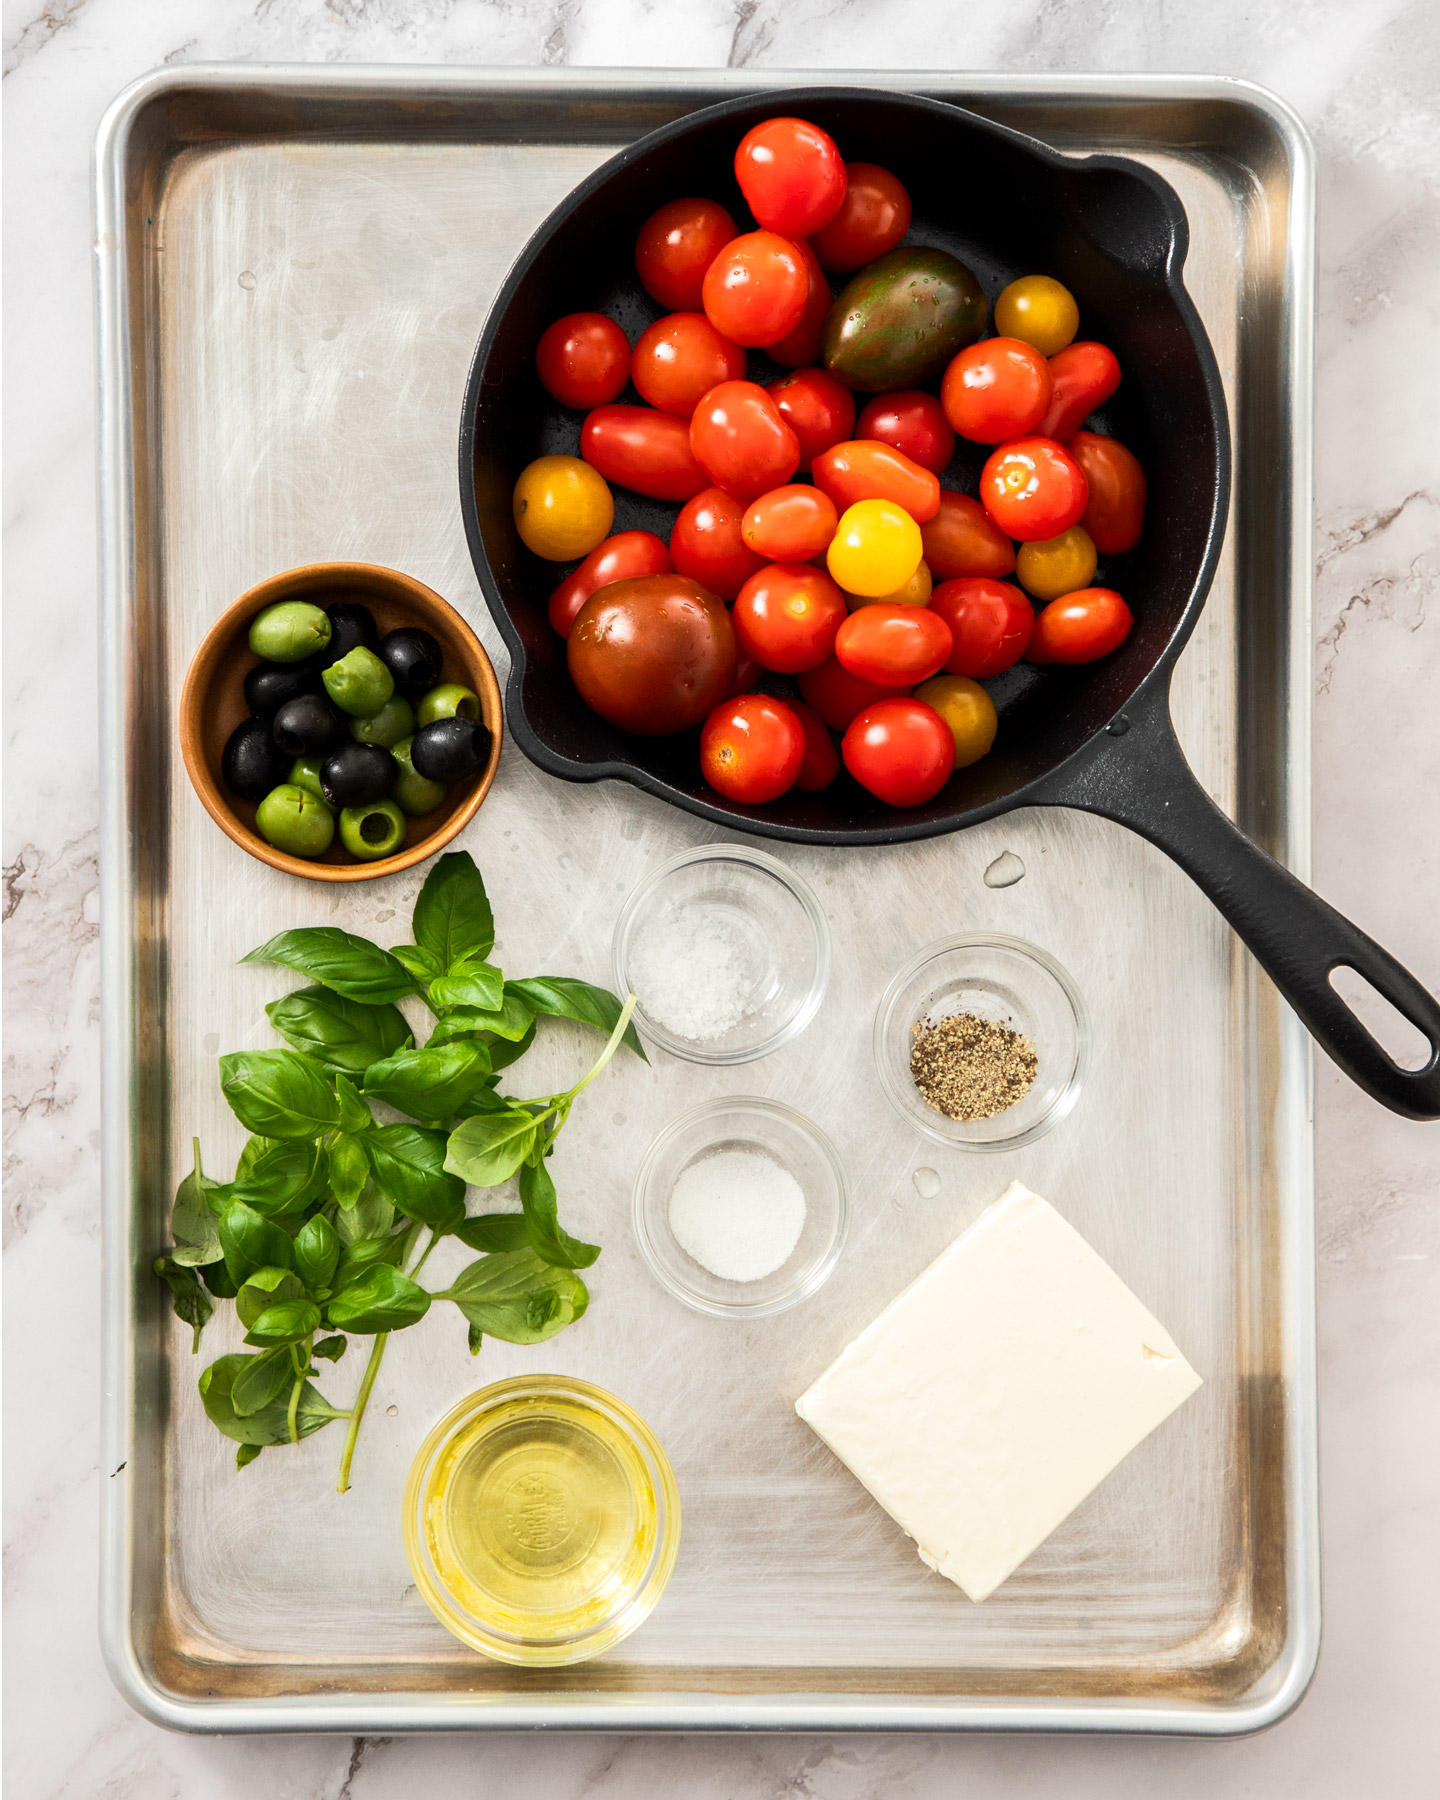 Ingredients for baked feta and tomatoes on a metal tray.